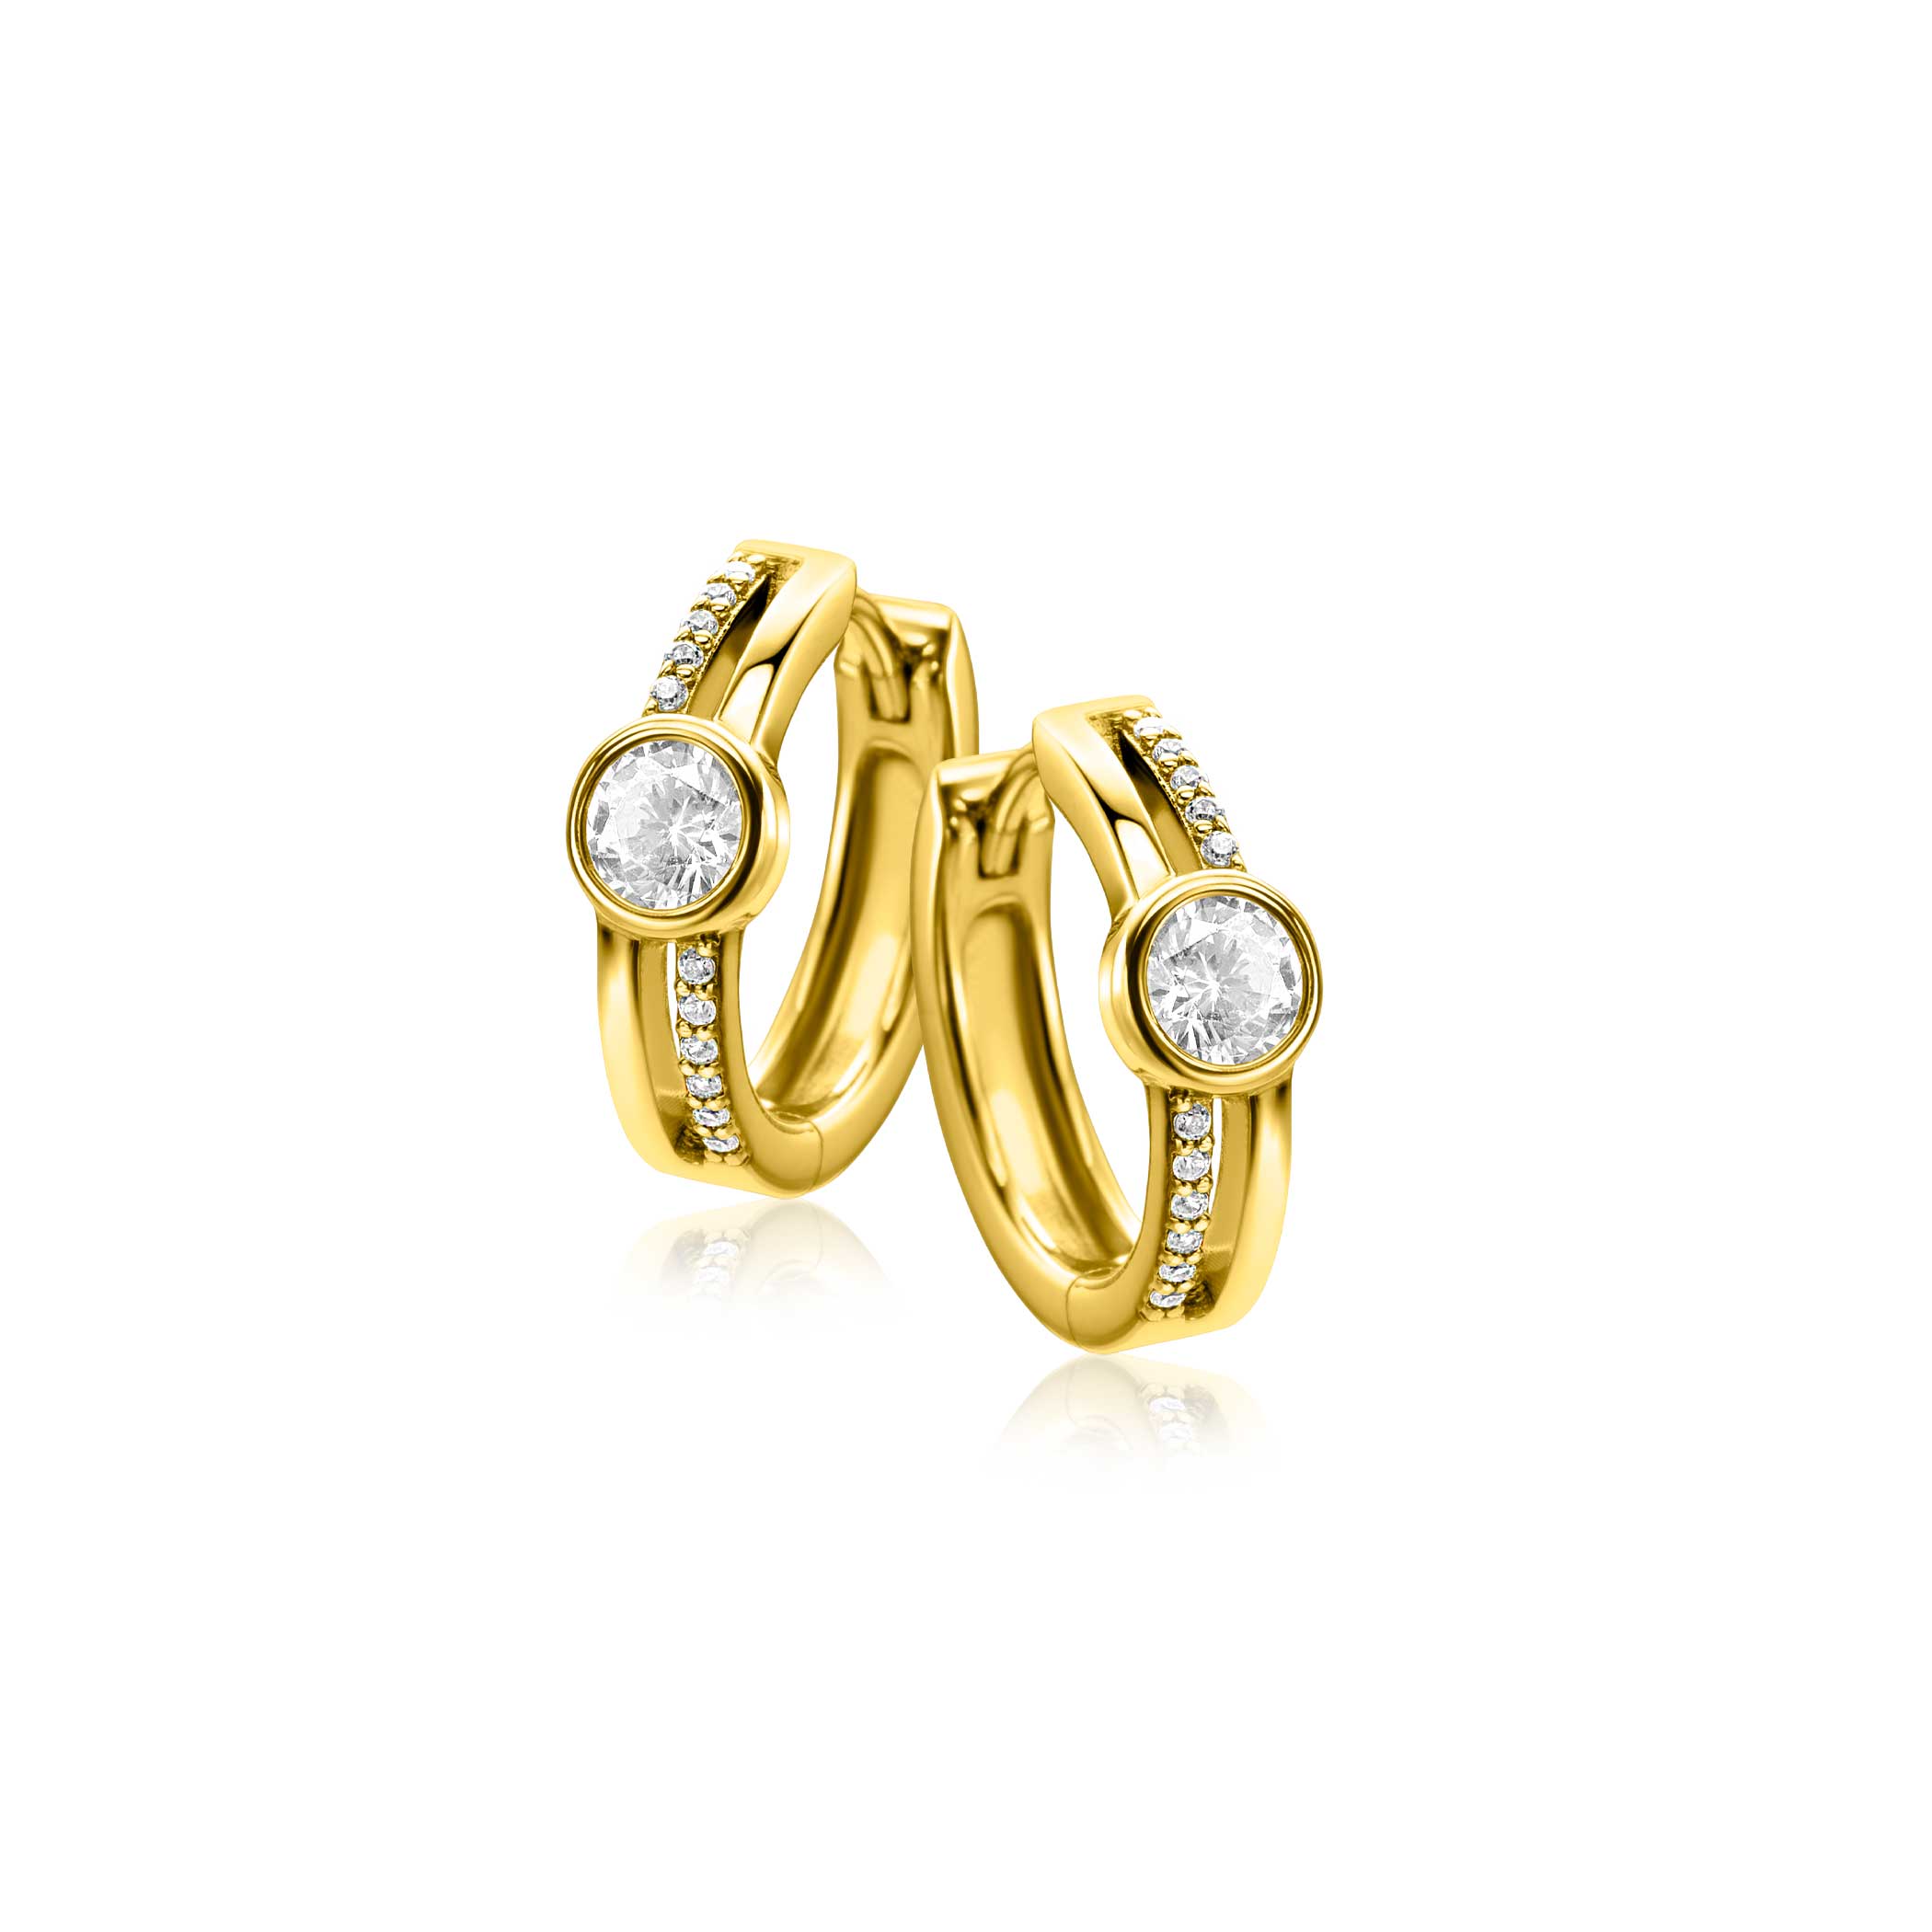 15.5mm ZINZI gold plated silver hoops with round bezel setting and multilook appearance, set with white zirconia and luxury hinge closure ZIO2625